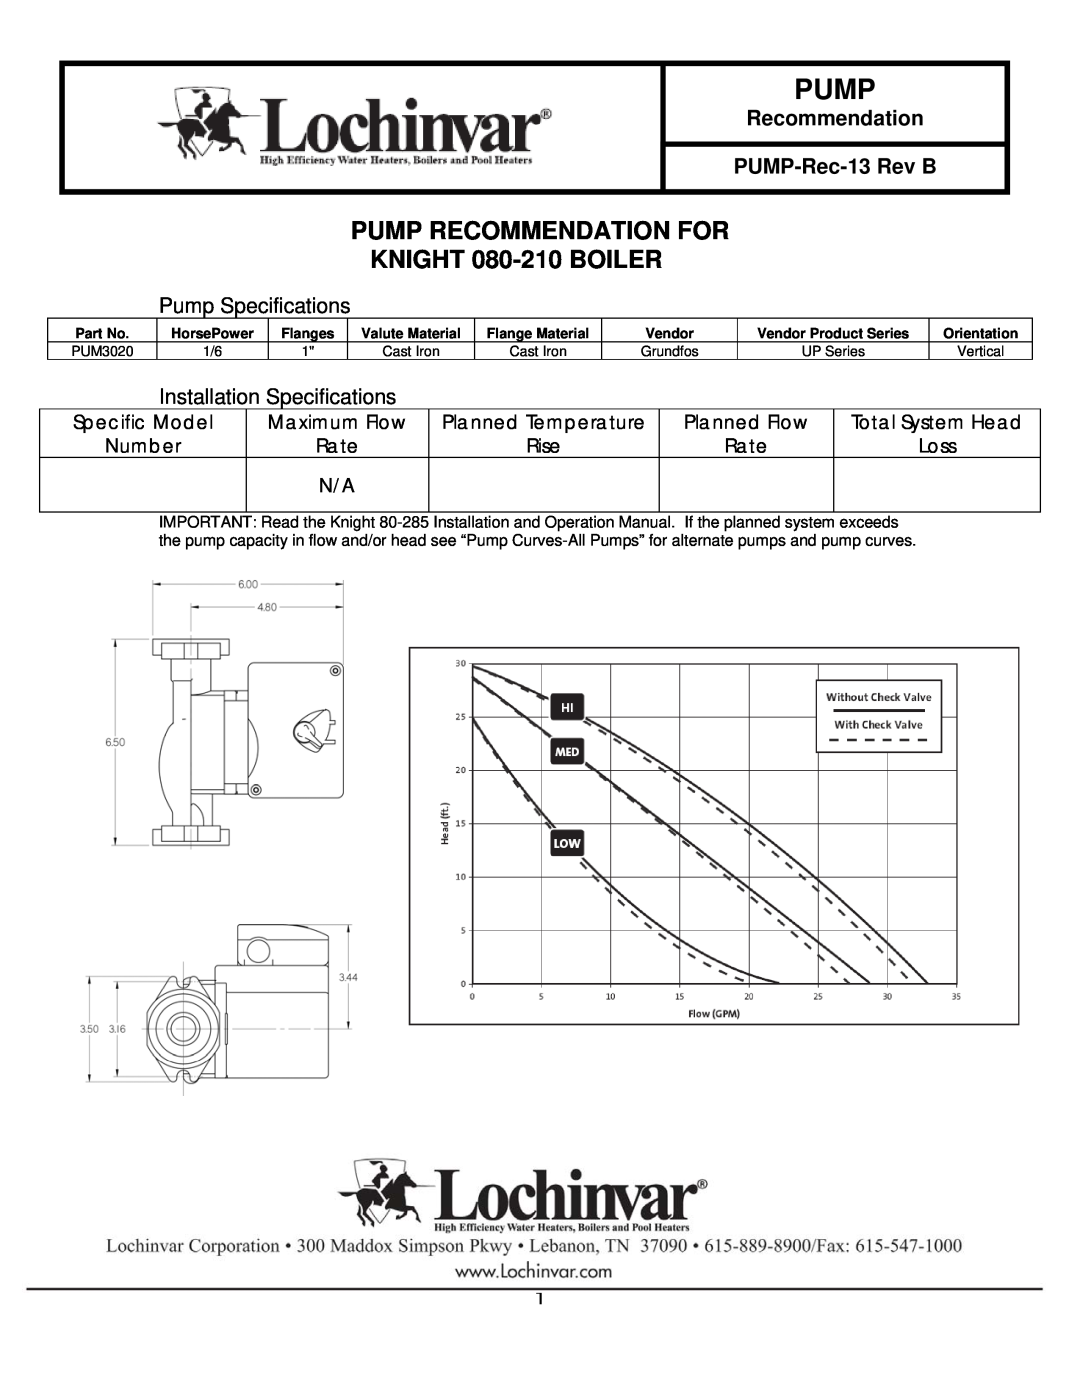 Lochinvar 080-210 specifications Pump Recommendation For, Pump Specifications, Installation Specifications, Number 